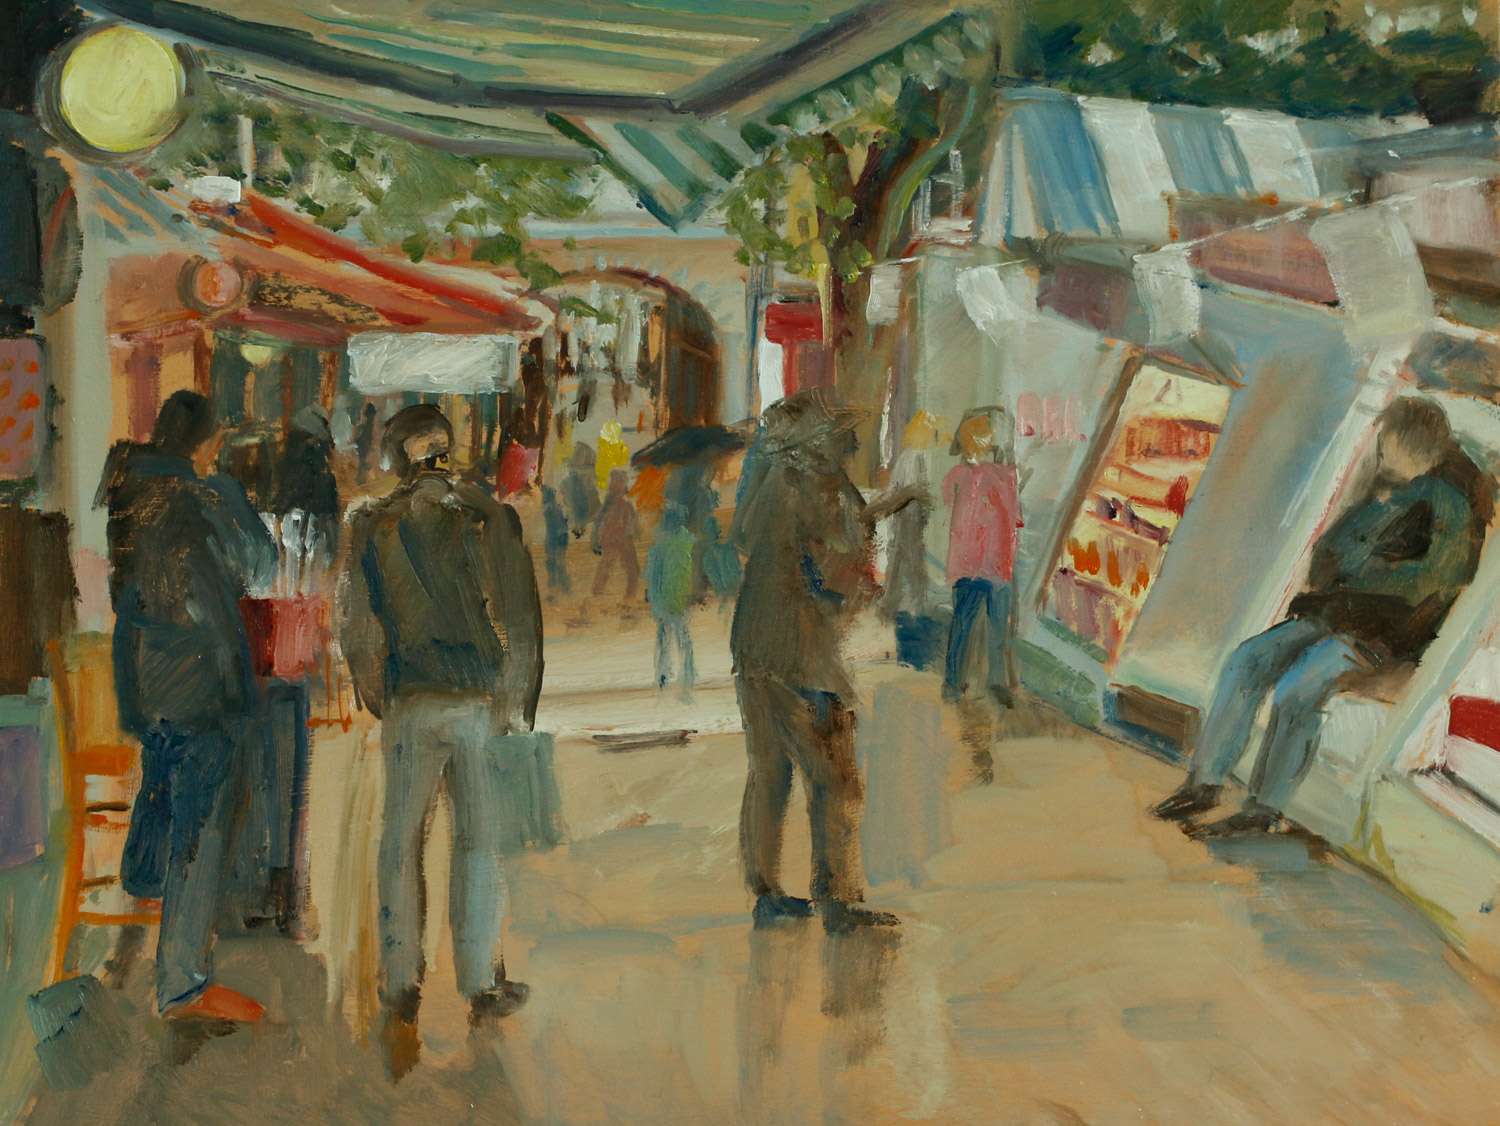 Artist Mary MacCarthy - Busy Market, £300 12x16 Oil on Board at Paint Out Norwich 2015